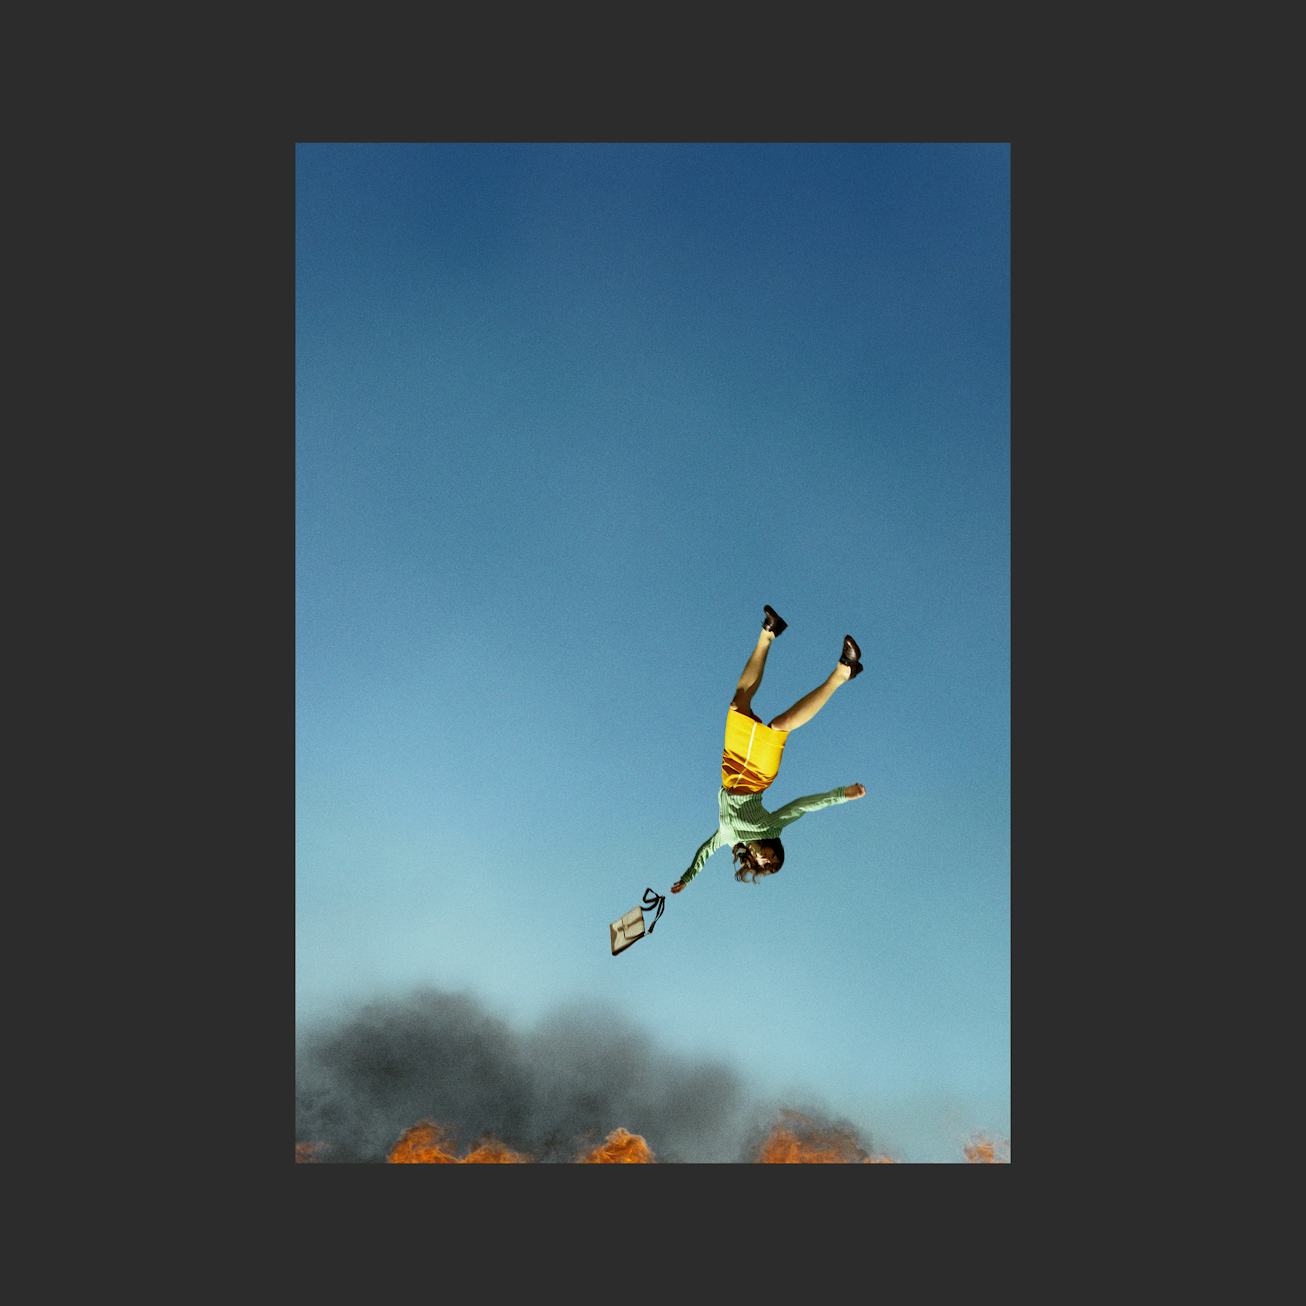 A woman falling down in fire as the cover of Spitfire's new album.